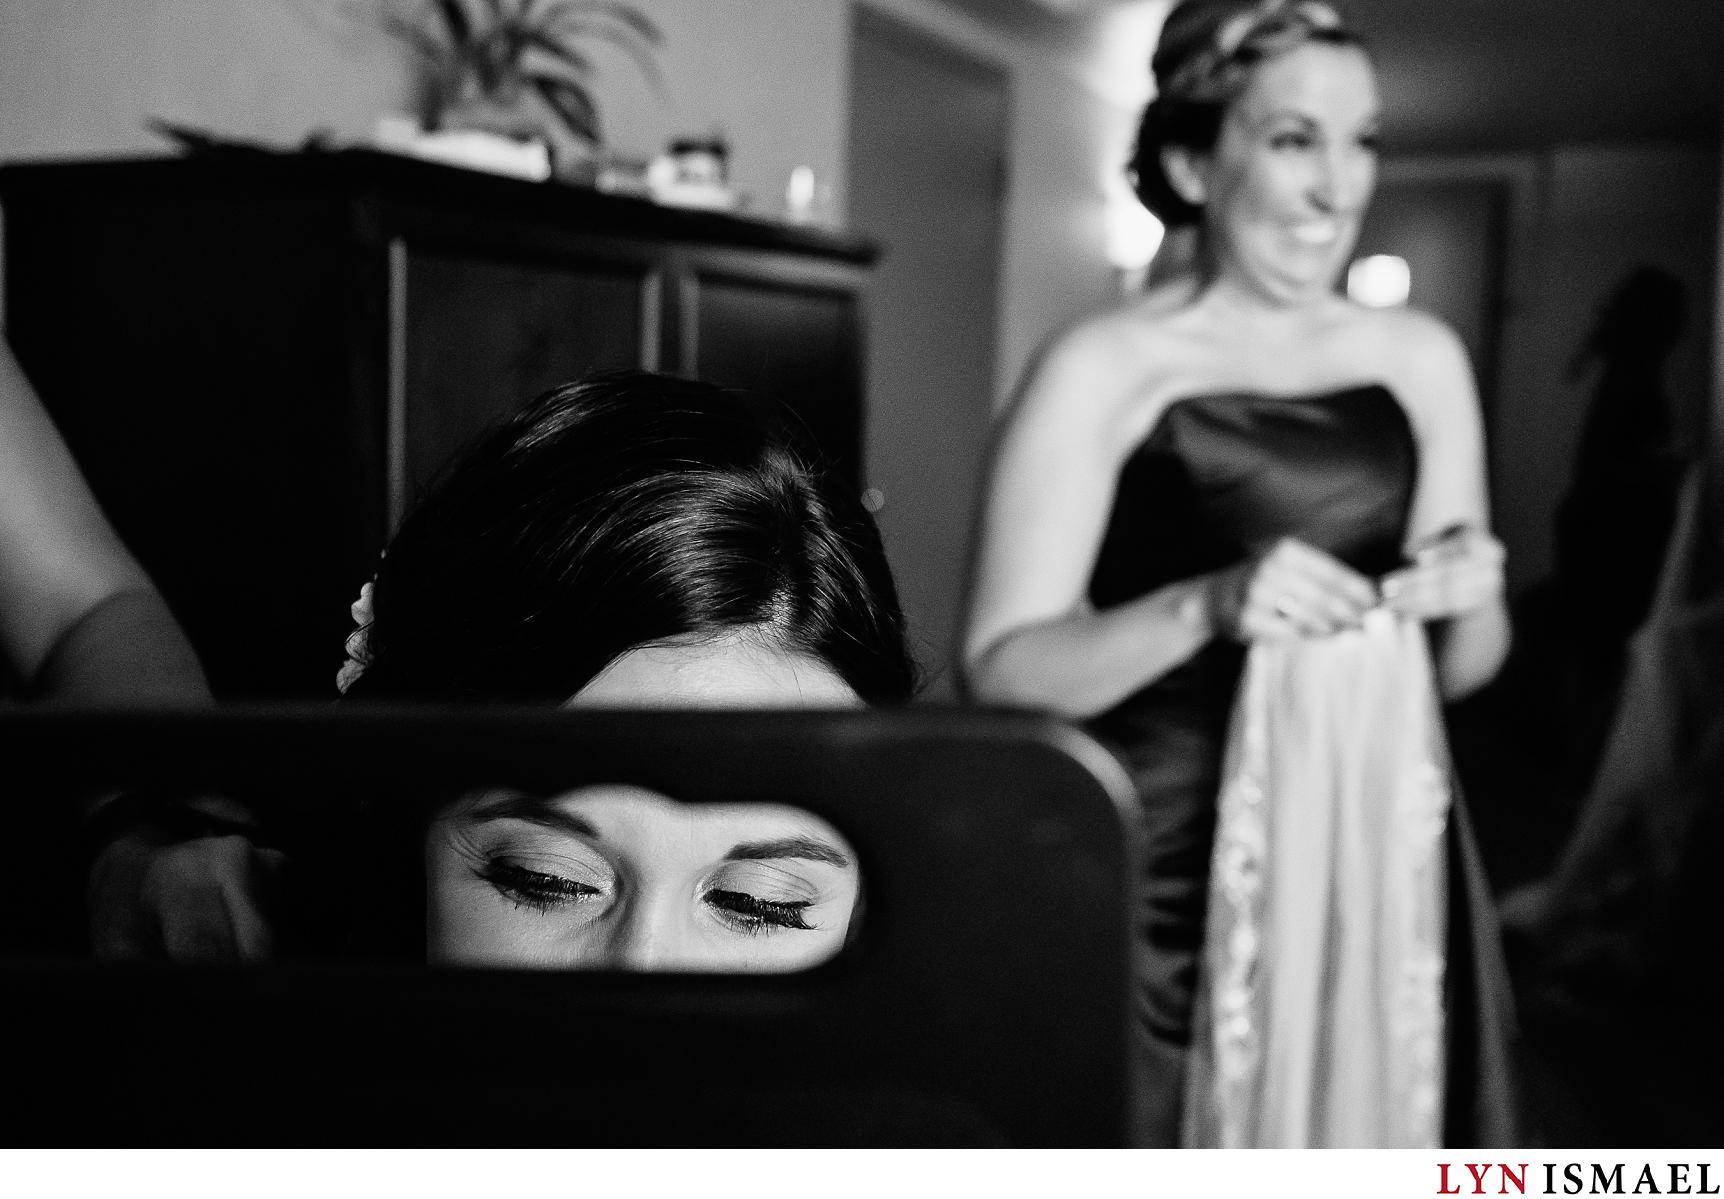 Bridesmaid looks excited to put the bride's veil on